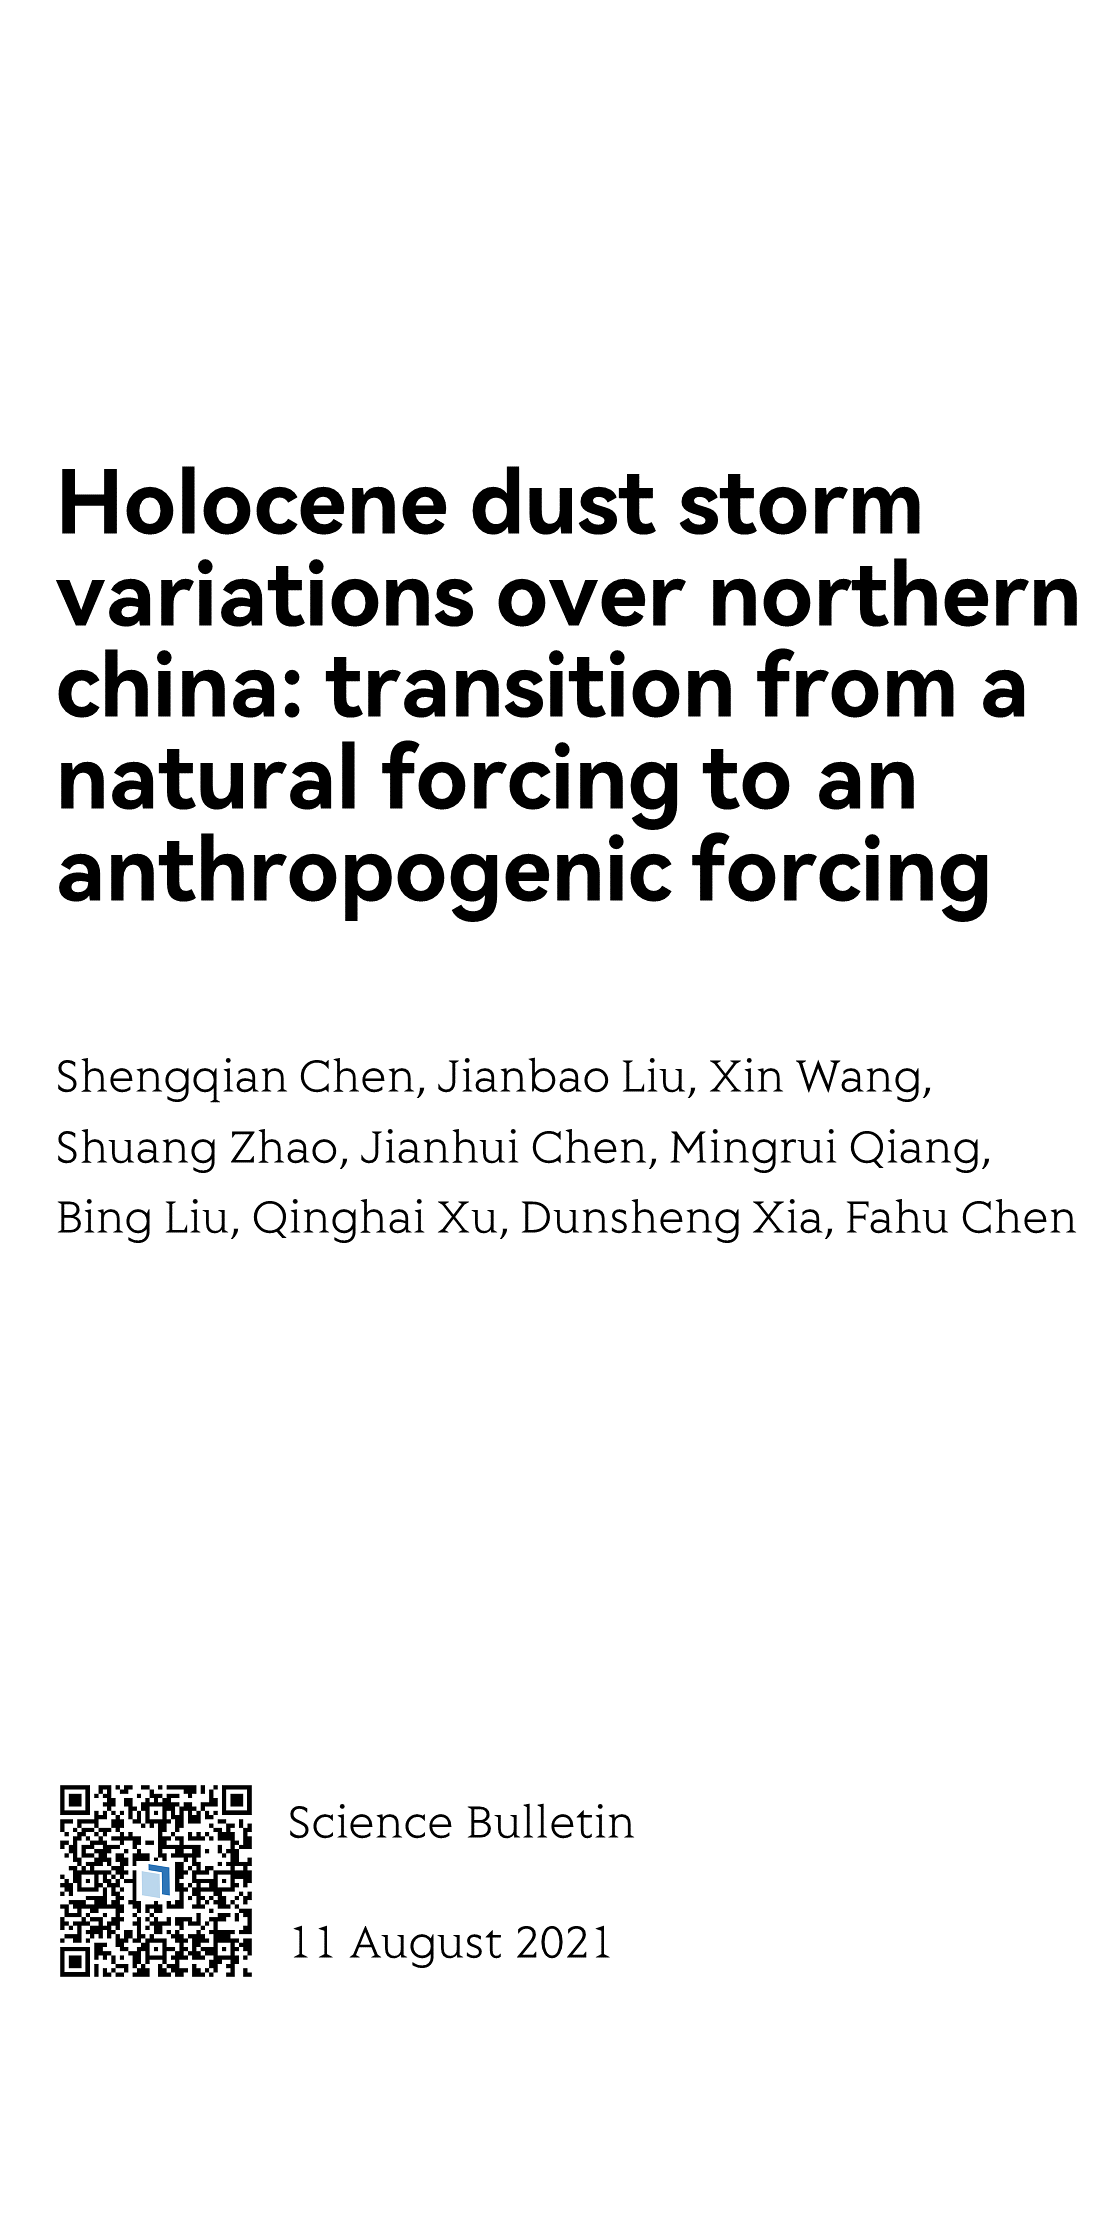 Holocene dust storm variations over northern china: transition from a natural forcing to an anthropogenic forcing_1